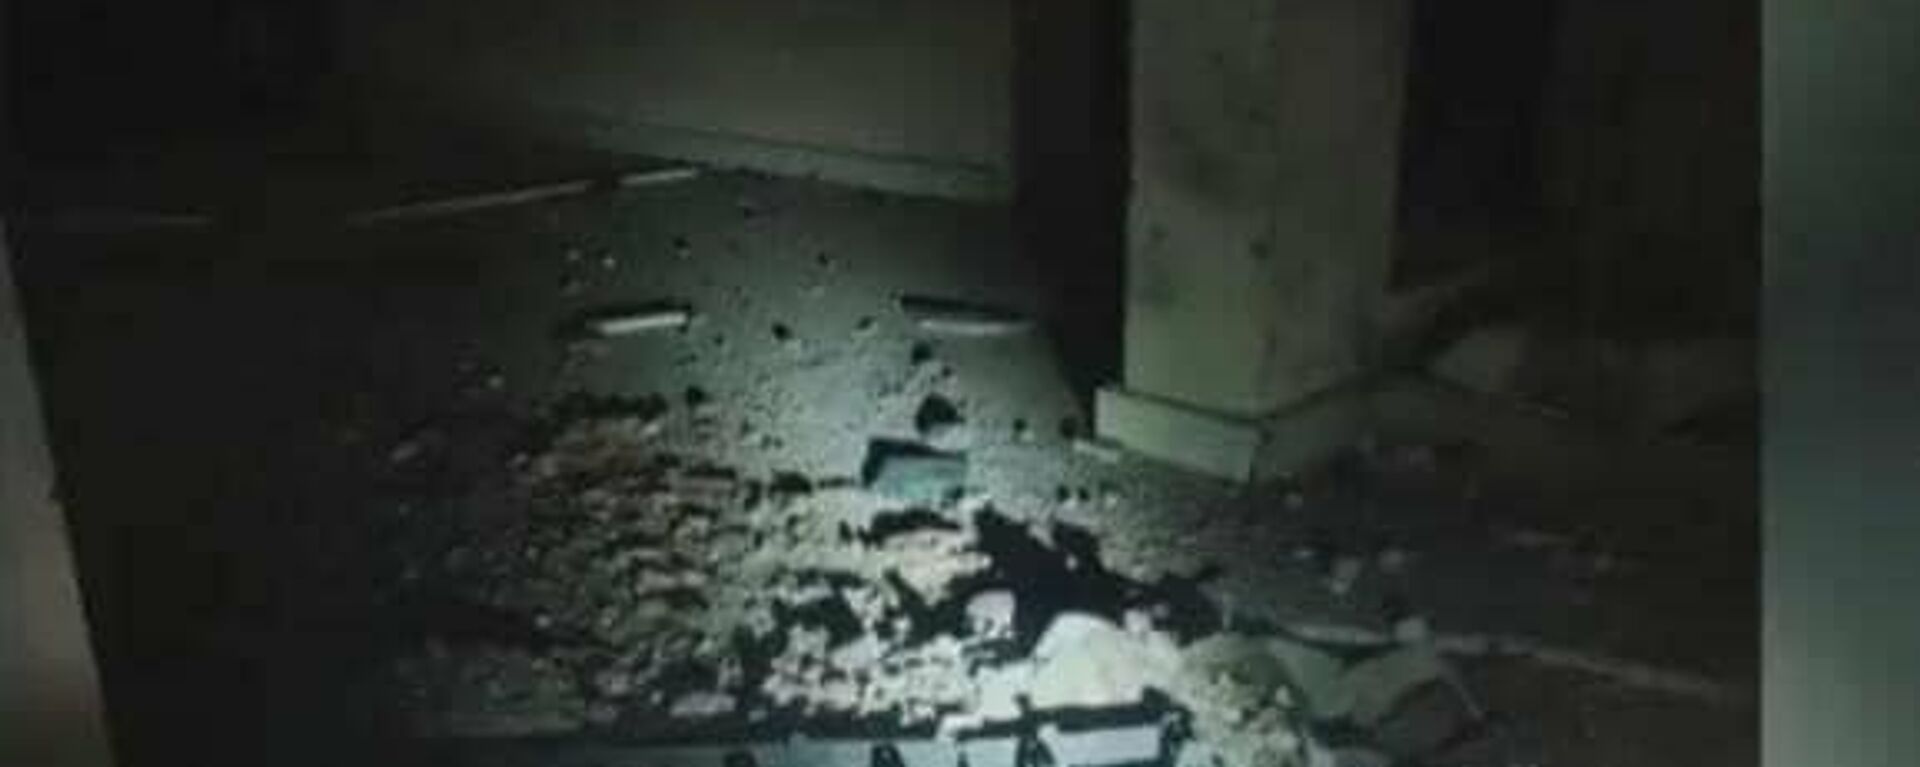 Photo showing damage to the Iraqi prime minister's residence in the wake of Sunday morning's drone attack. - Sputnik International, 1920, 07.11.2021